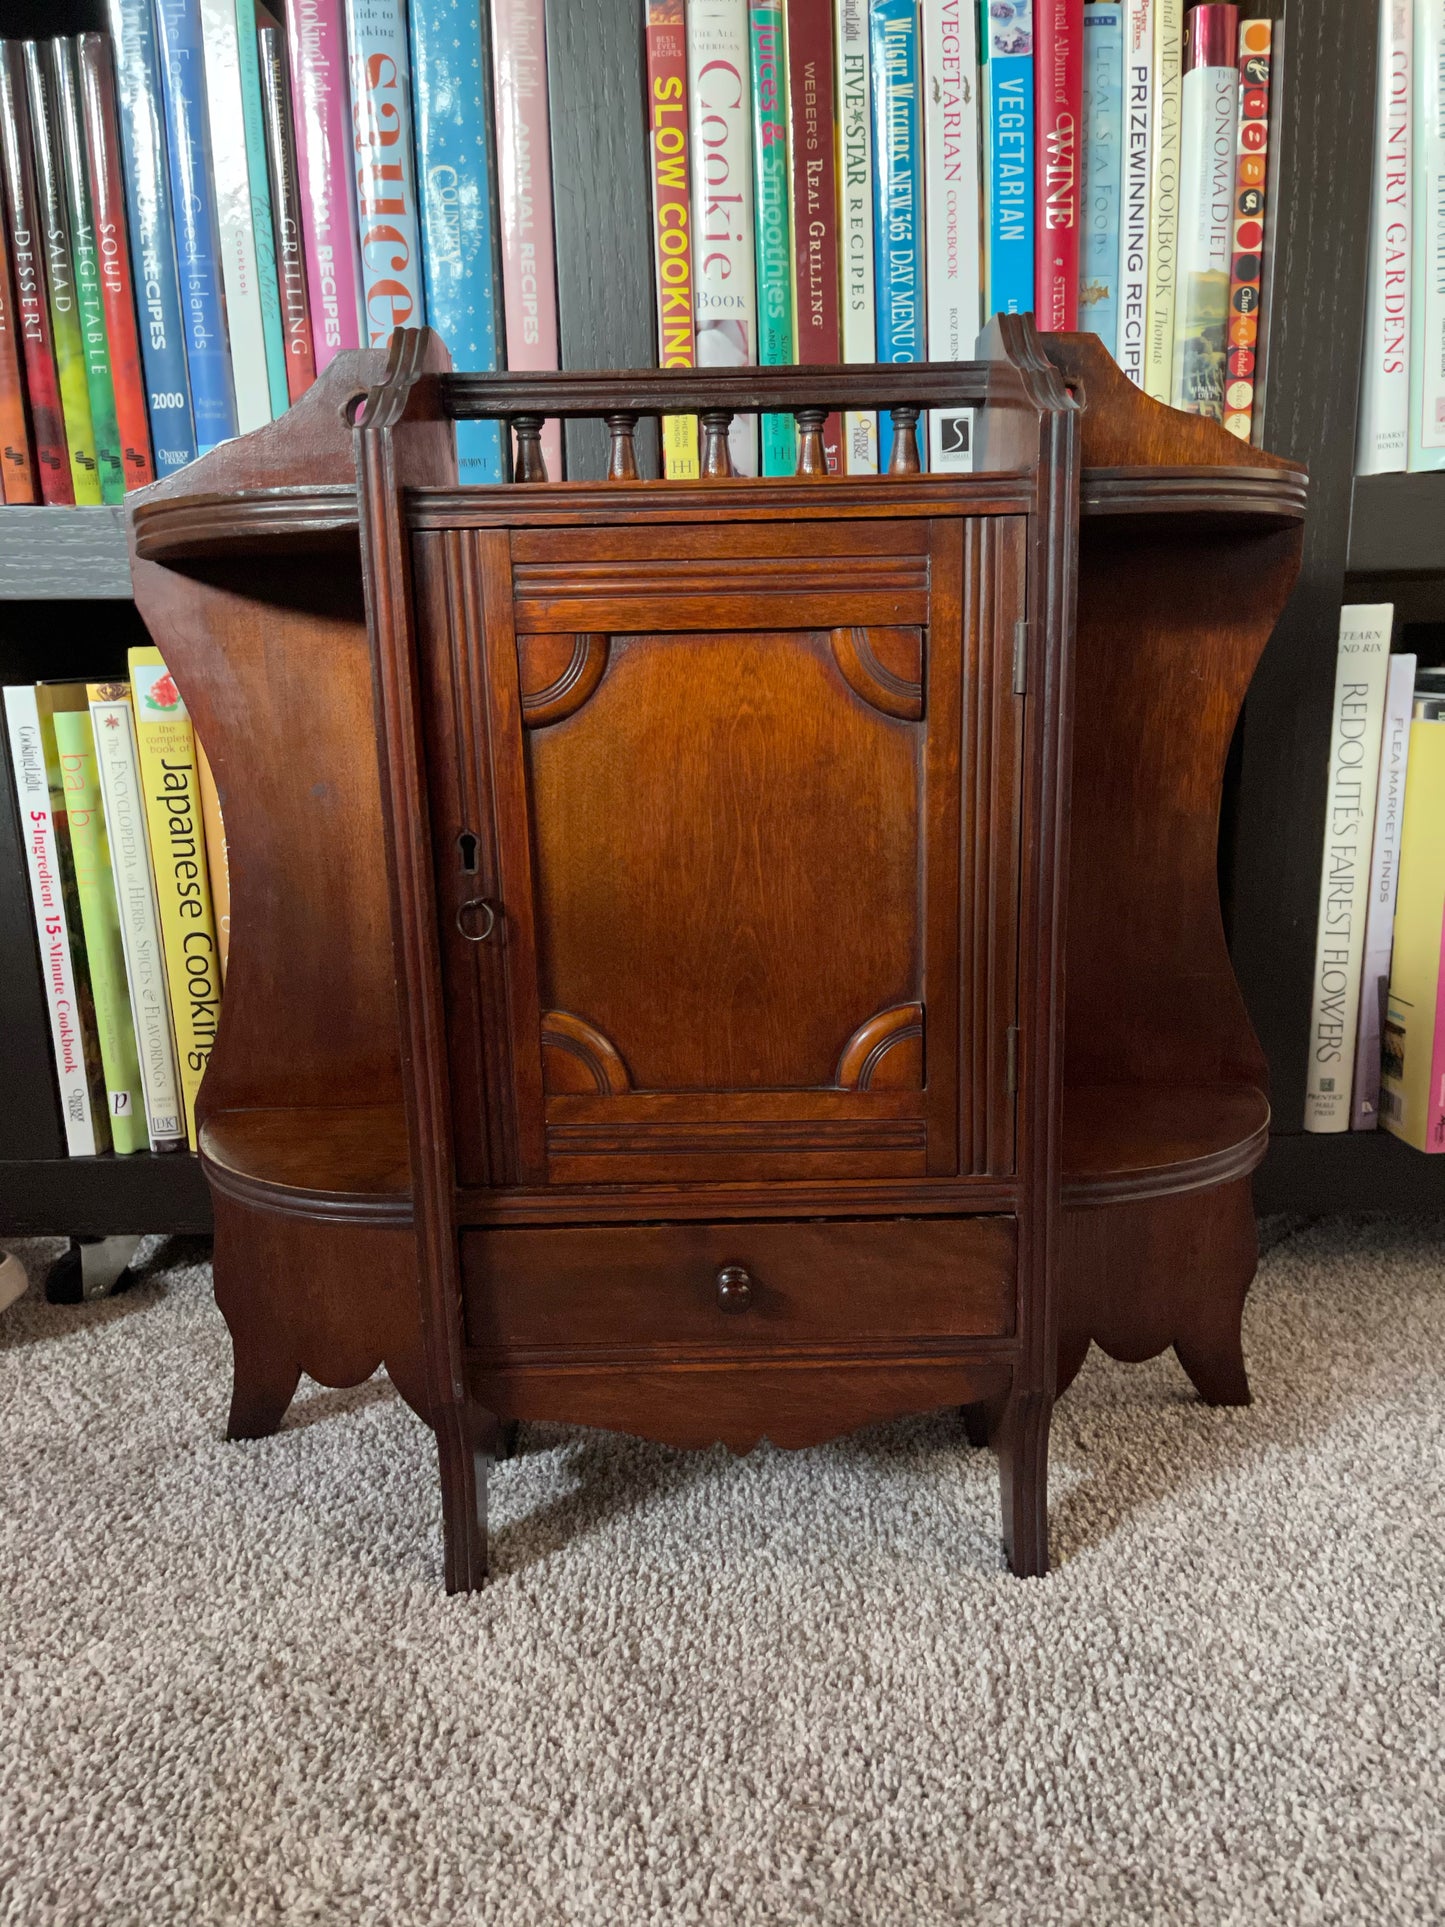 Absolutely Gorgeous Old World Vintage Cabinet, Antique Cabinet